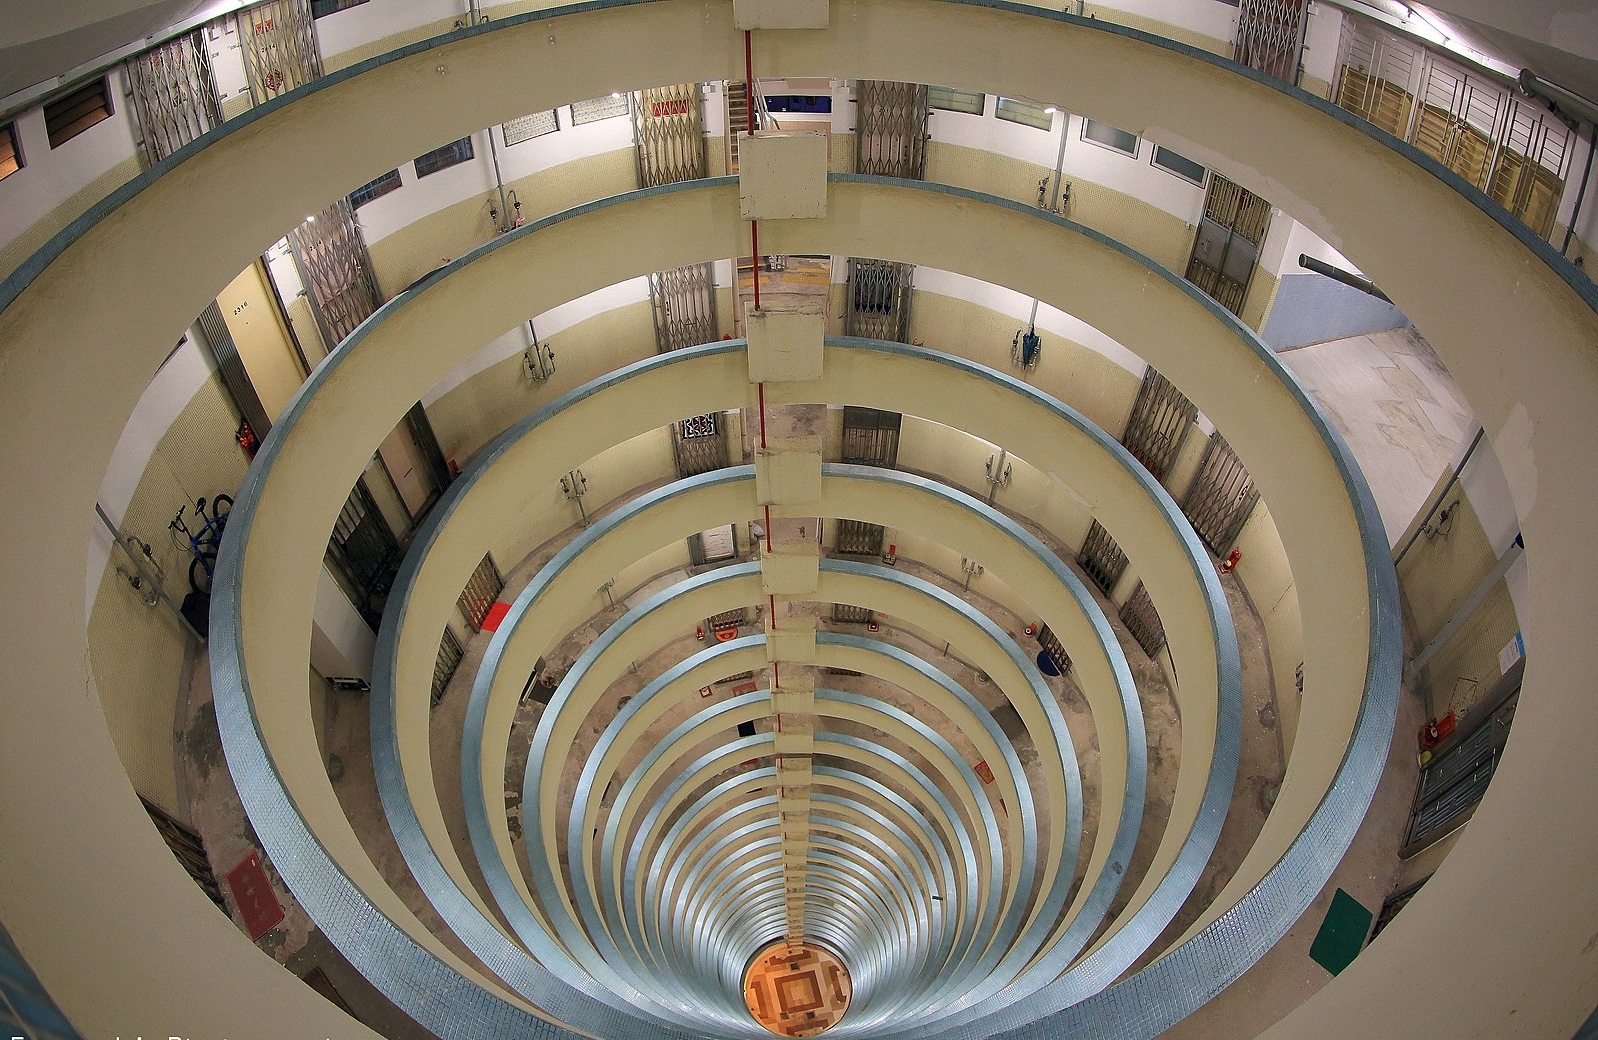 26 Cool and Unusual Things to Do in Hong Kong - Atlas Obscura